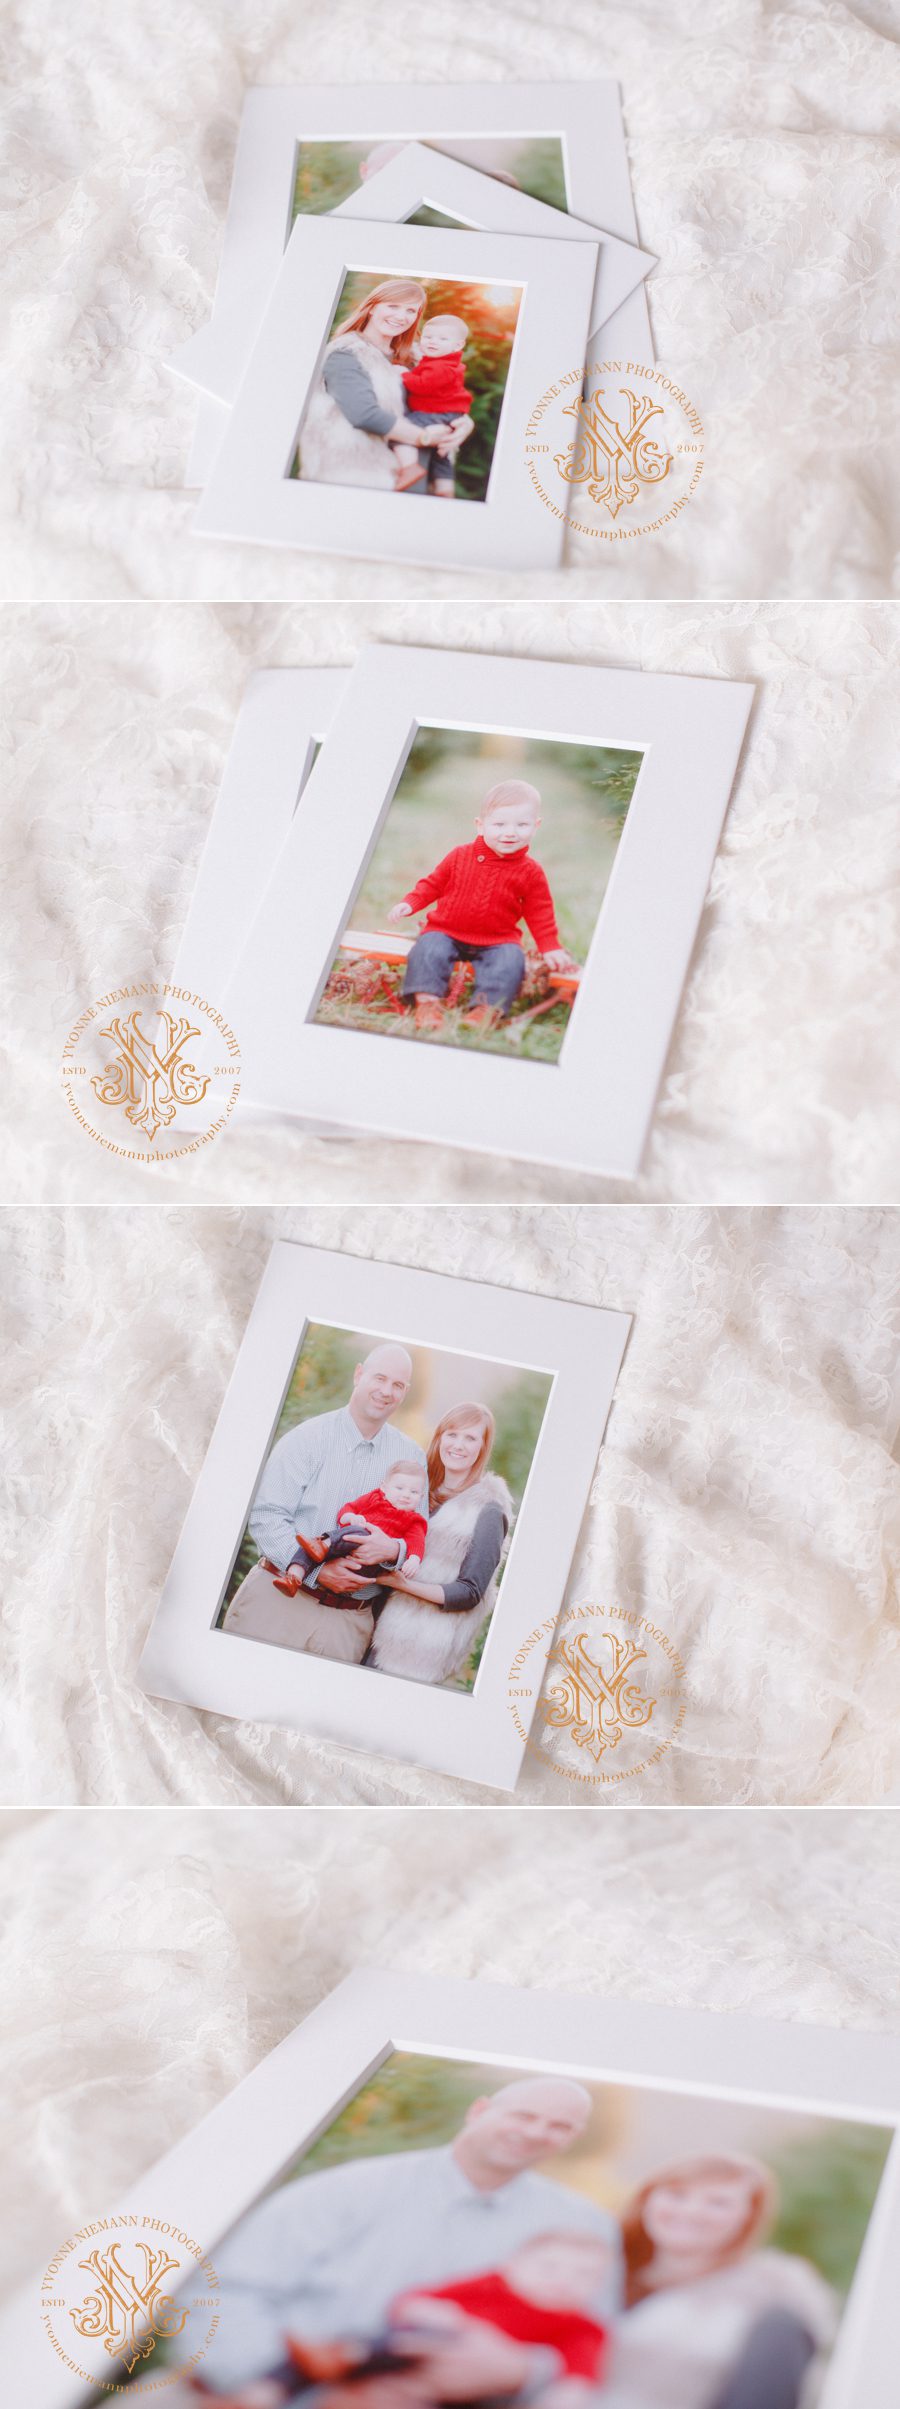 Product shots of a family's matted portrait prints of their baby's first Christmas in Athens, GA.